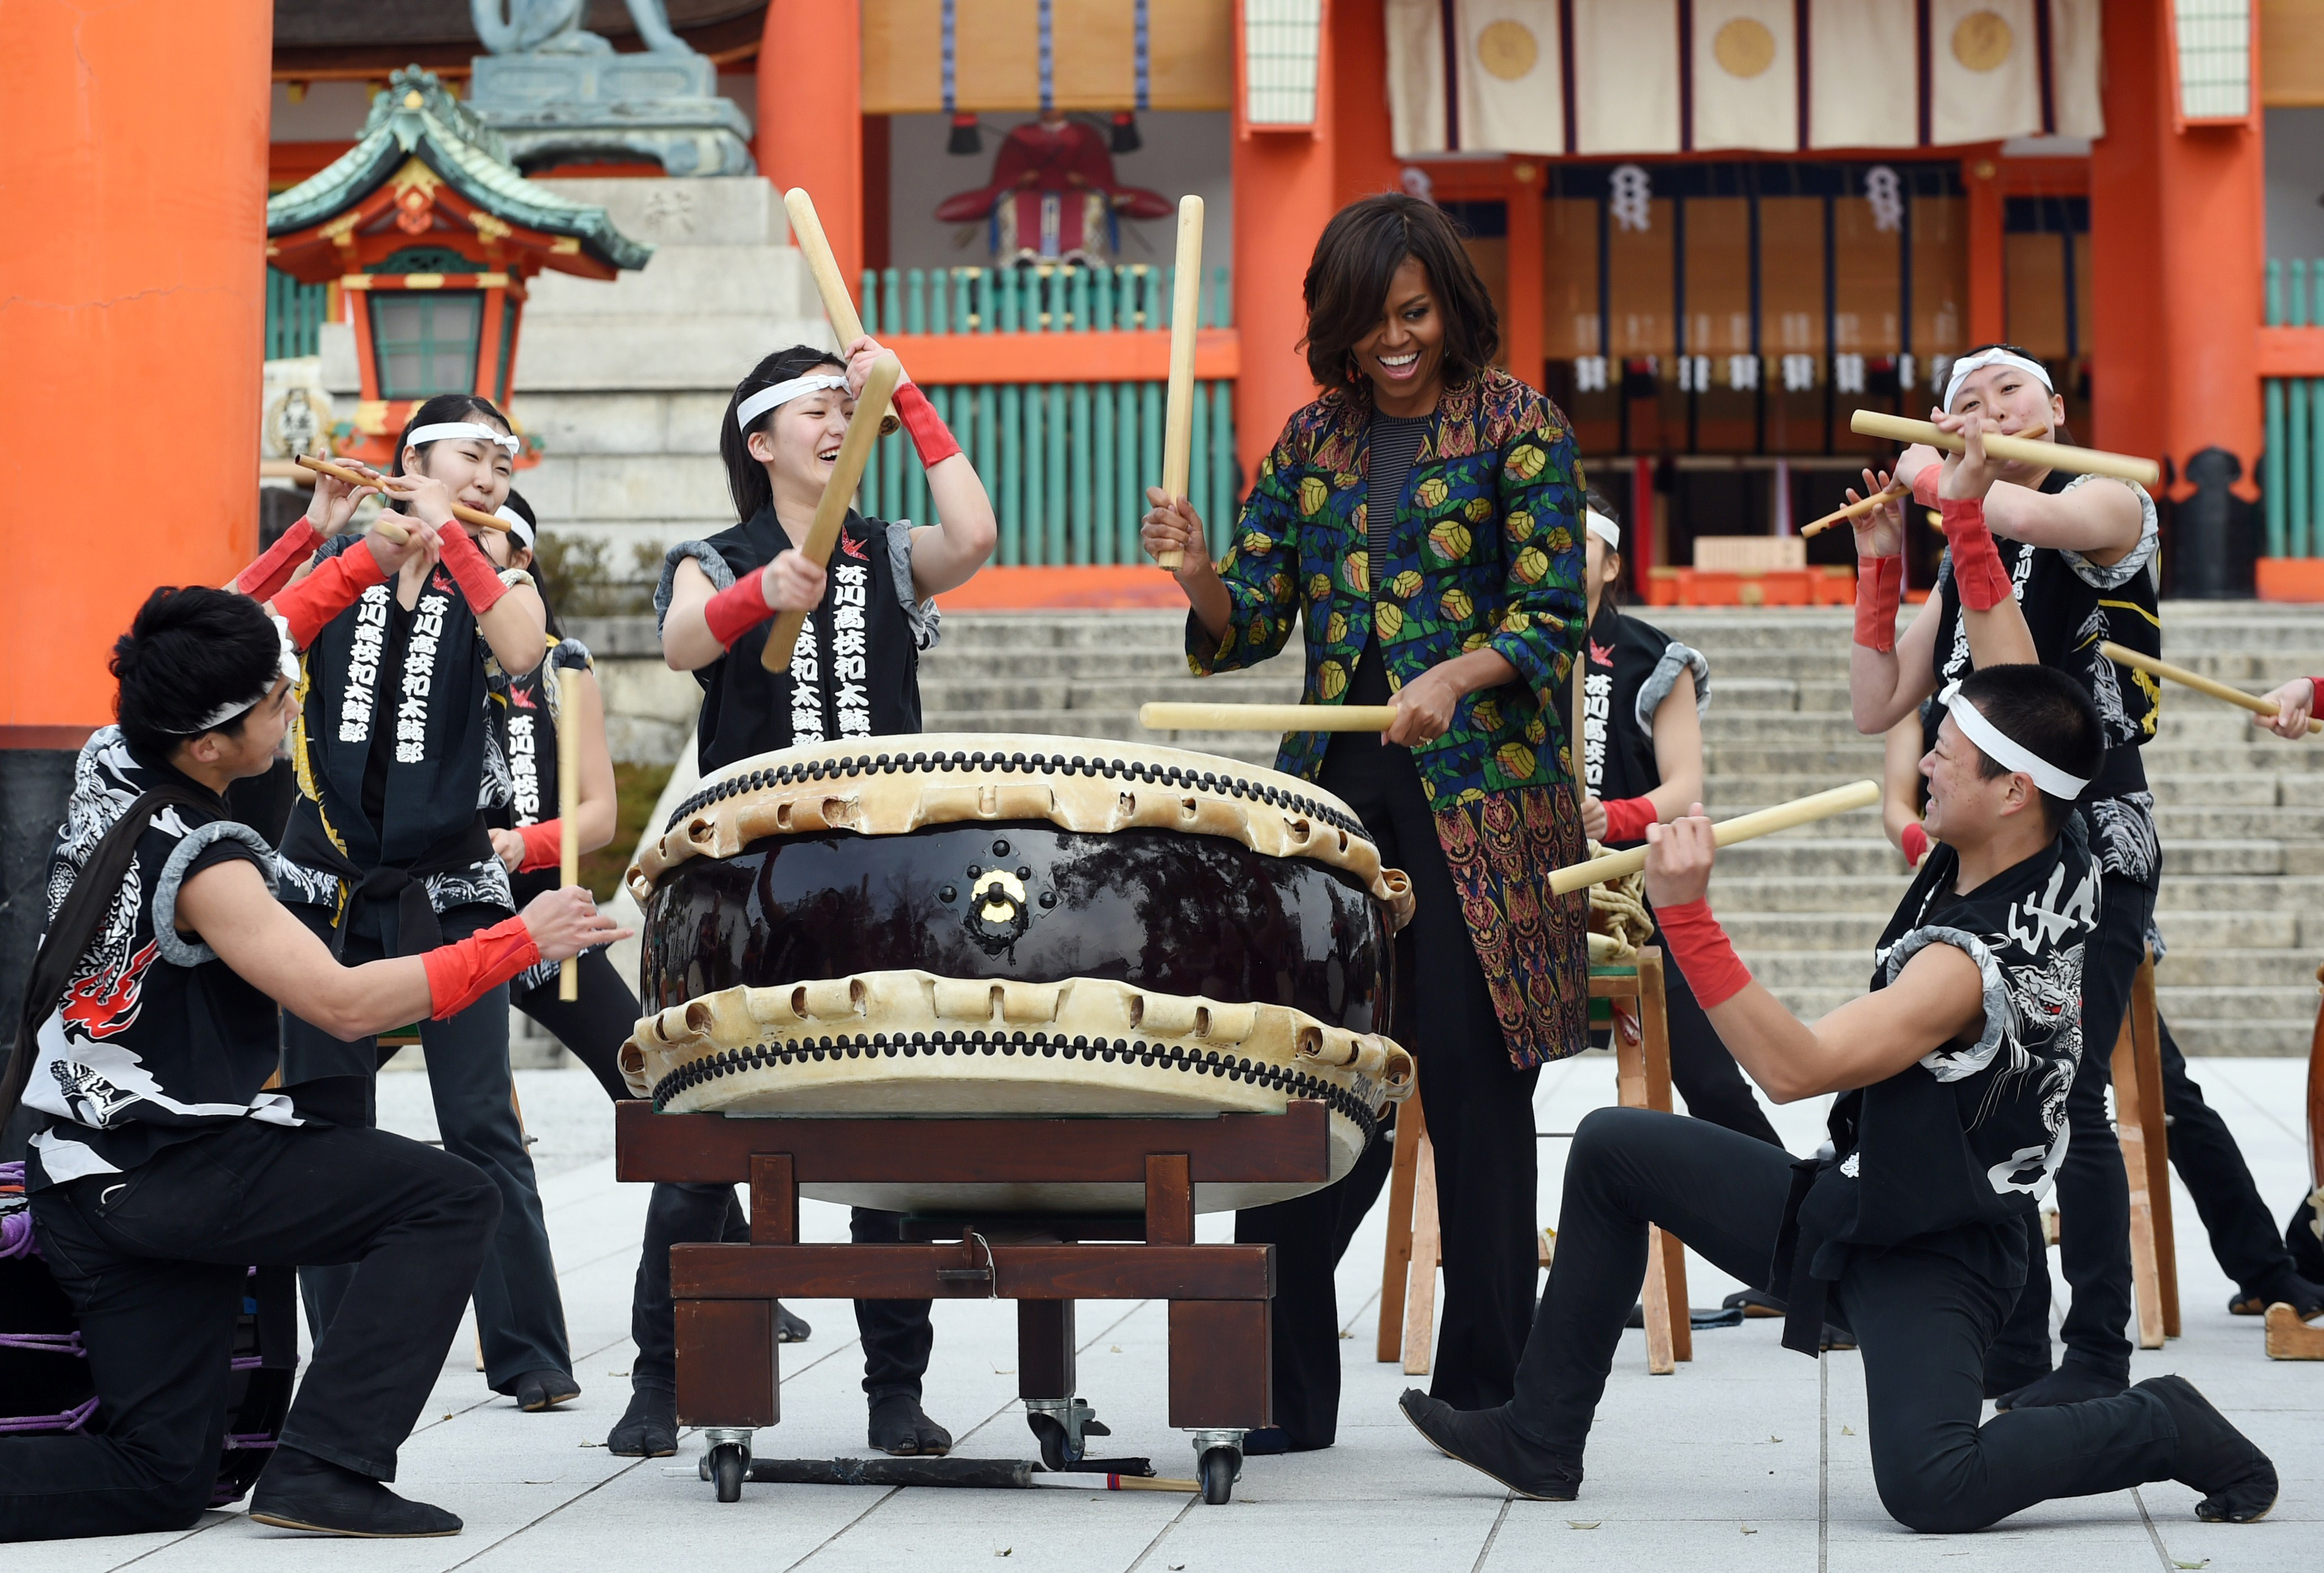 First Lady Michelle Obama plays the Taiko (Japanese traditional drum) with Manaka Hirose and members of the Akutagawa high school Taiko Club while visiting the Fushimi Inari shrine in Kyoto on March 20, 2015.